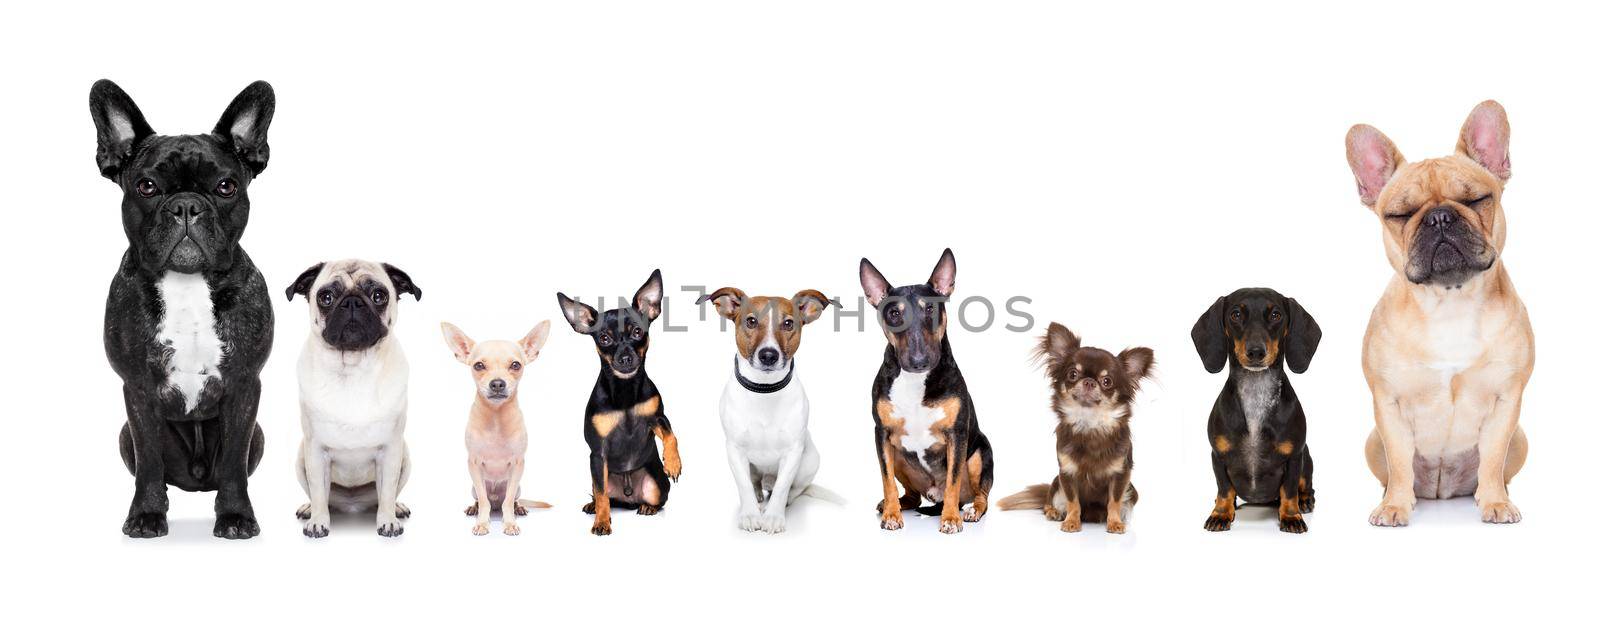 team group row of dogs taking a selfie isolated on white background, smile and happy snapshot